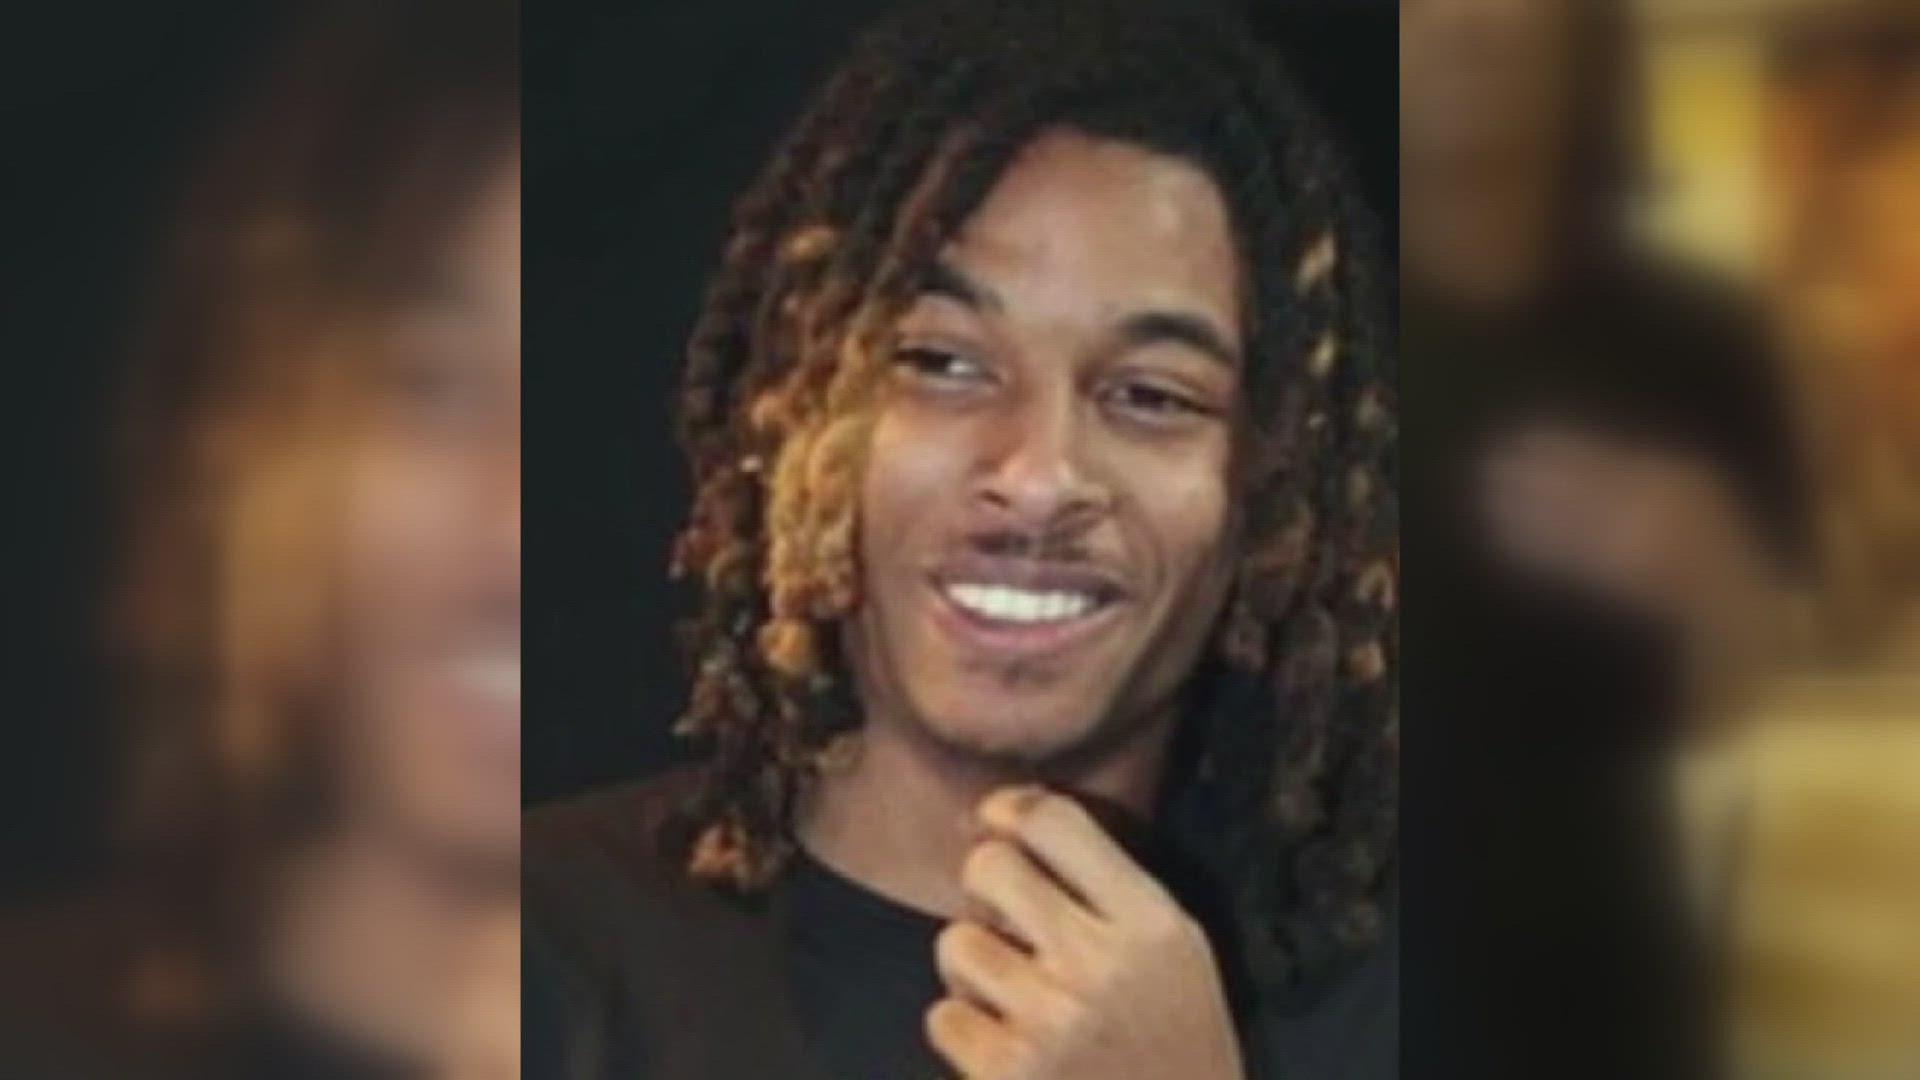 Kansas City police are now asking for the public's help in finding 19-year-old T'Montez Hurt after he was last seen 56 days ago.